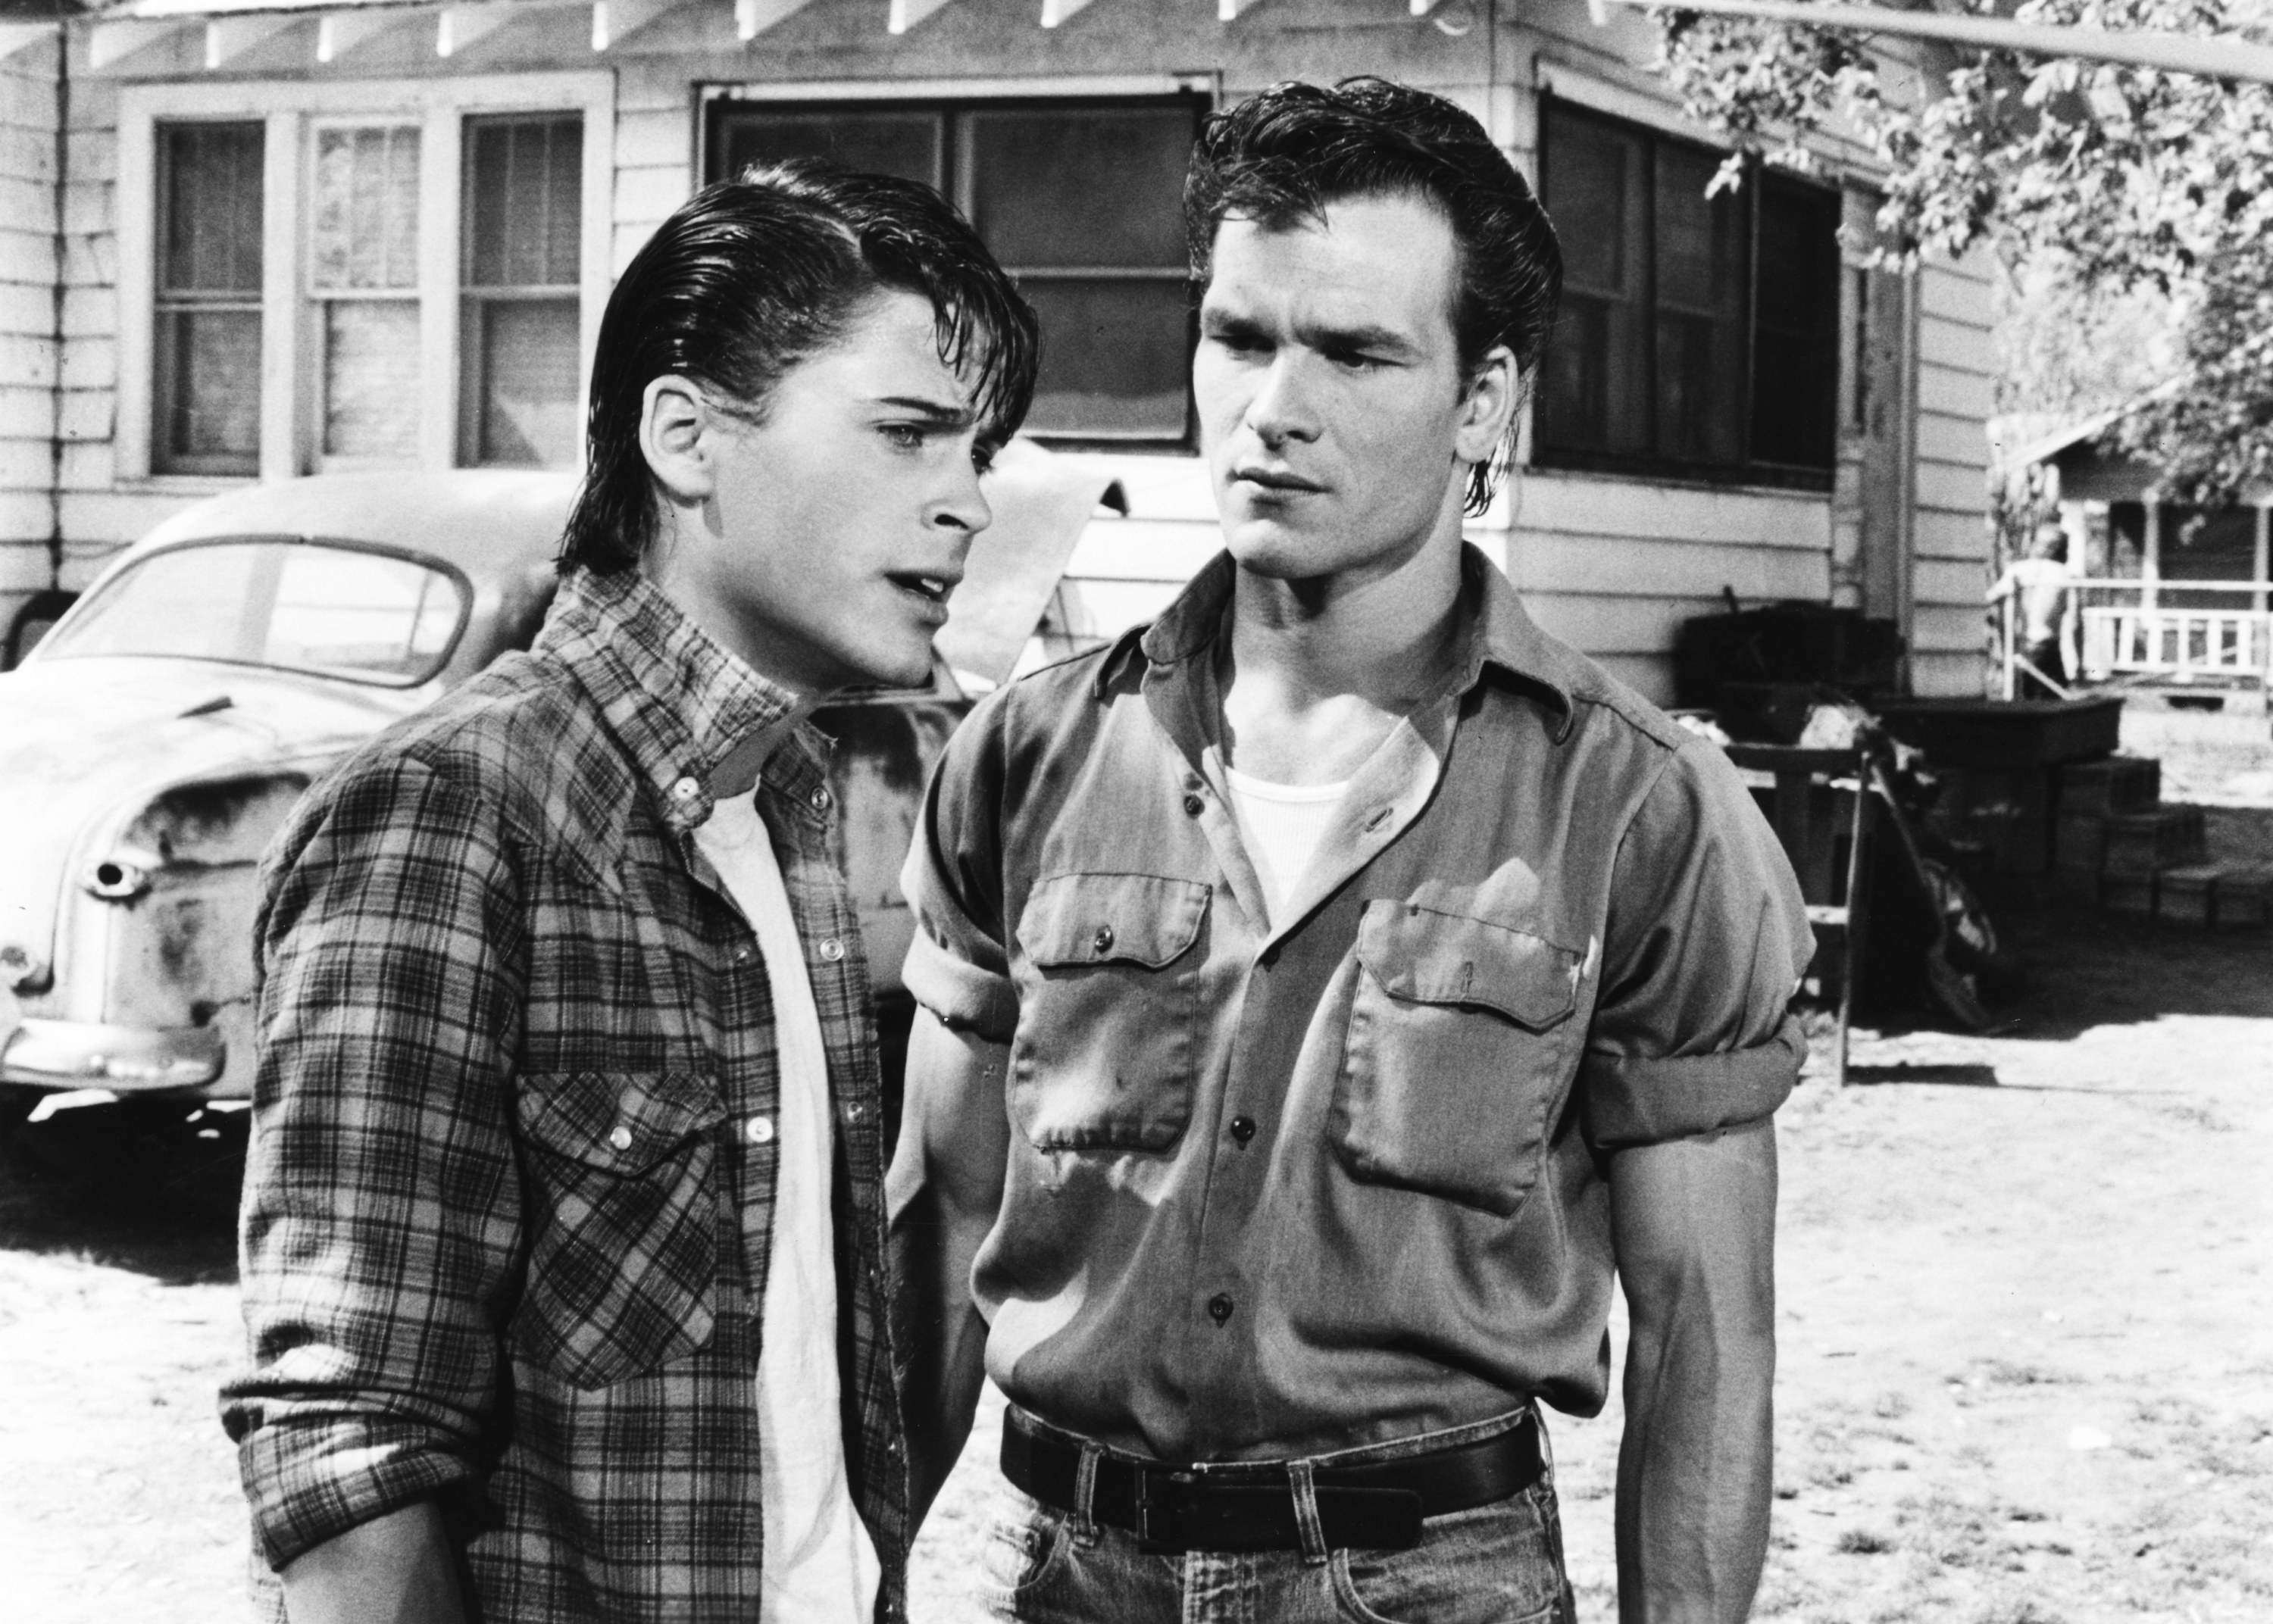 Rob Lowe and Patrick Swayze in The Outsiders